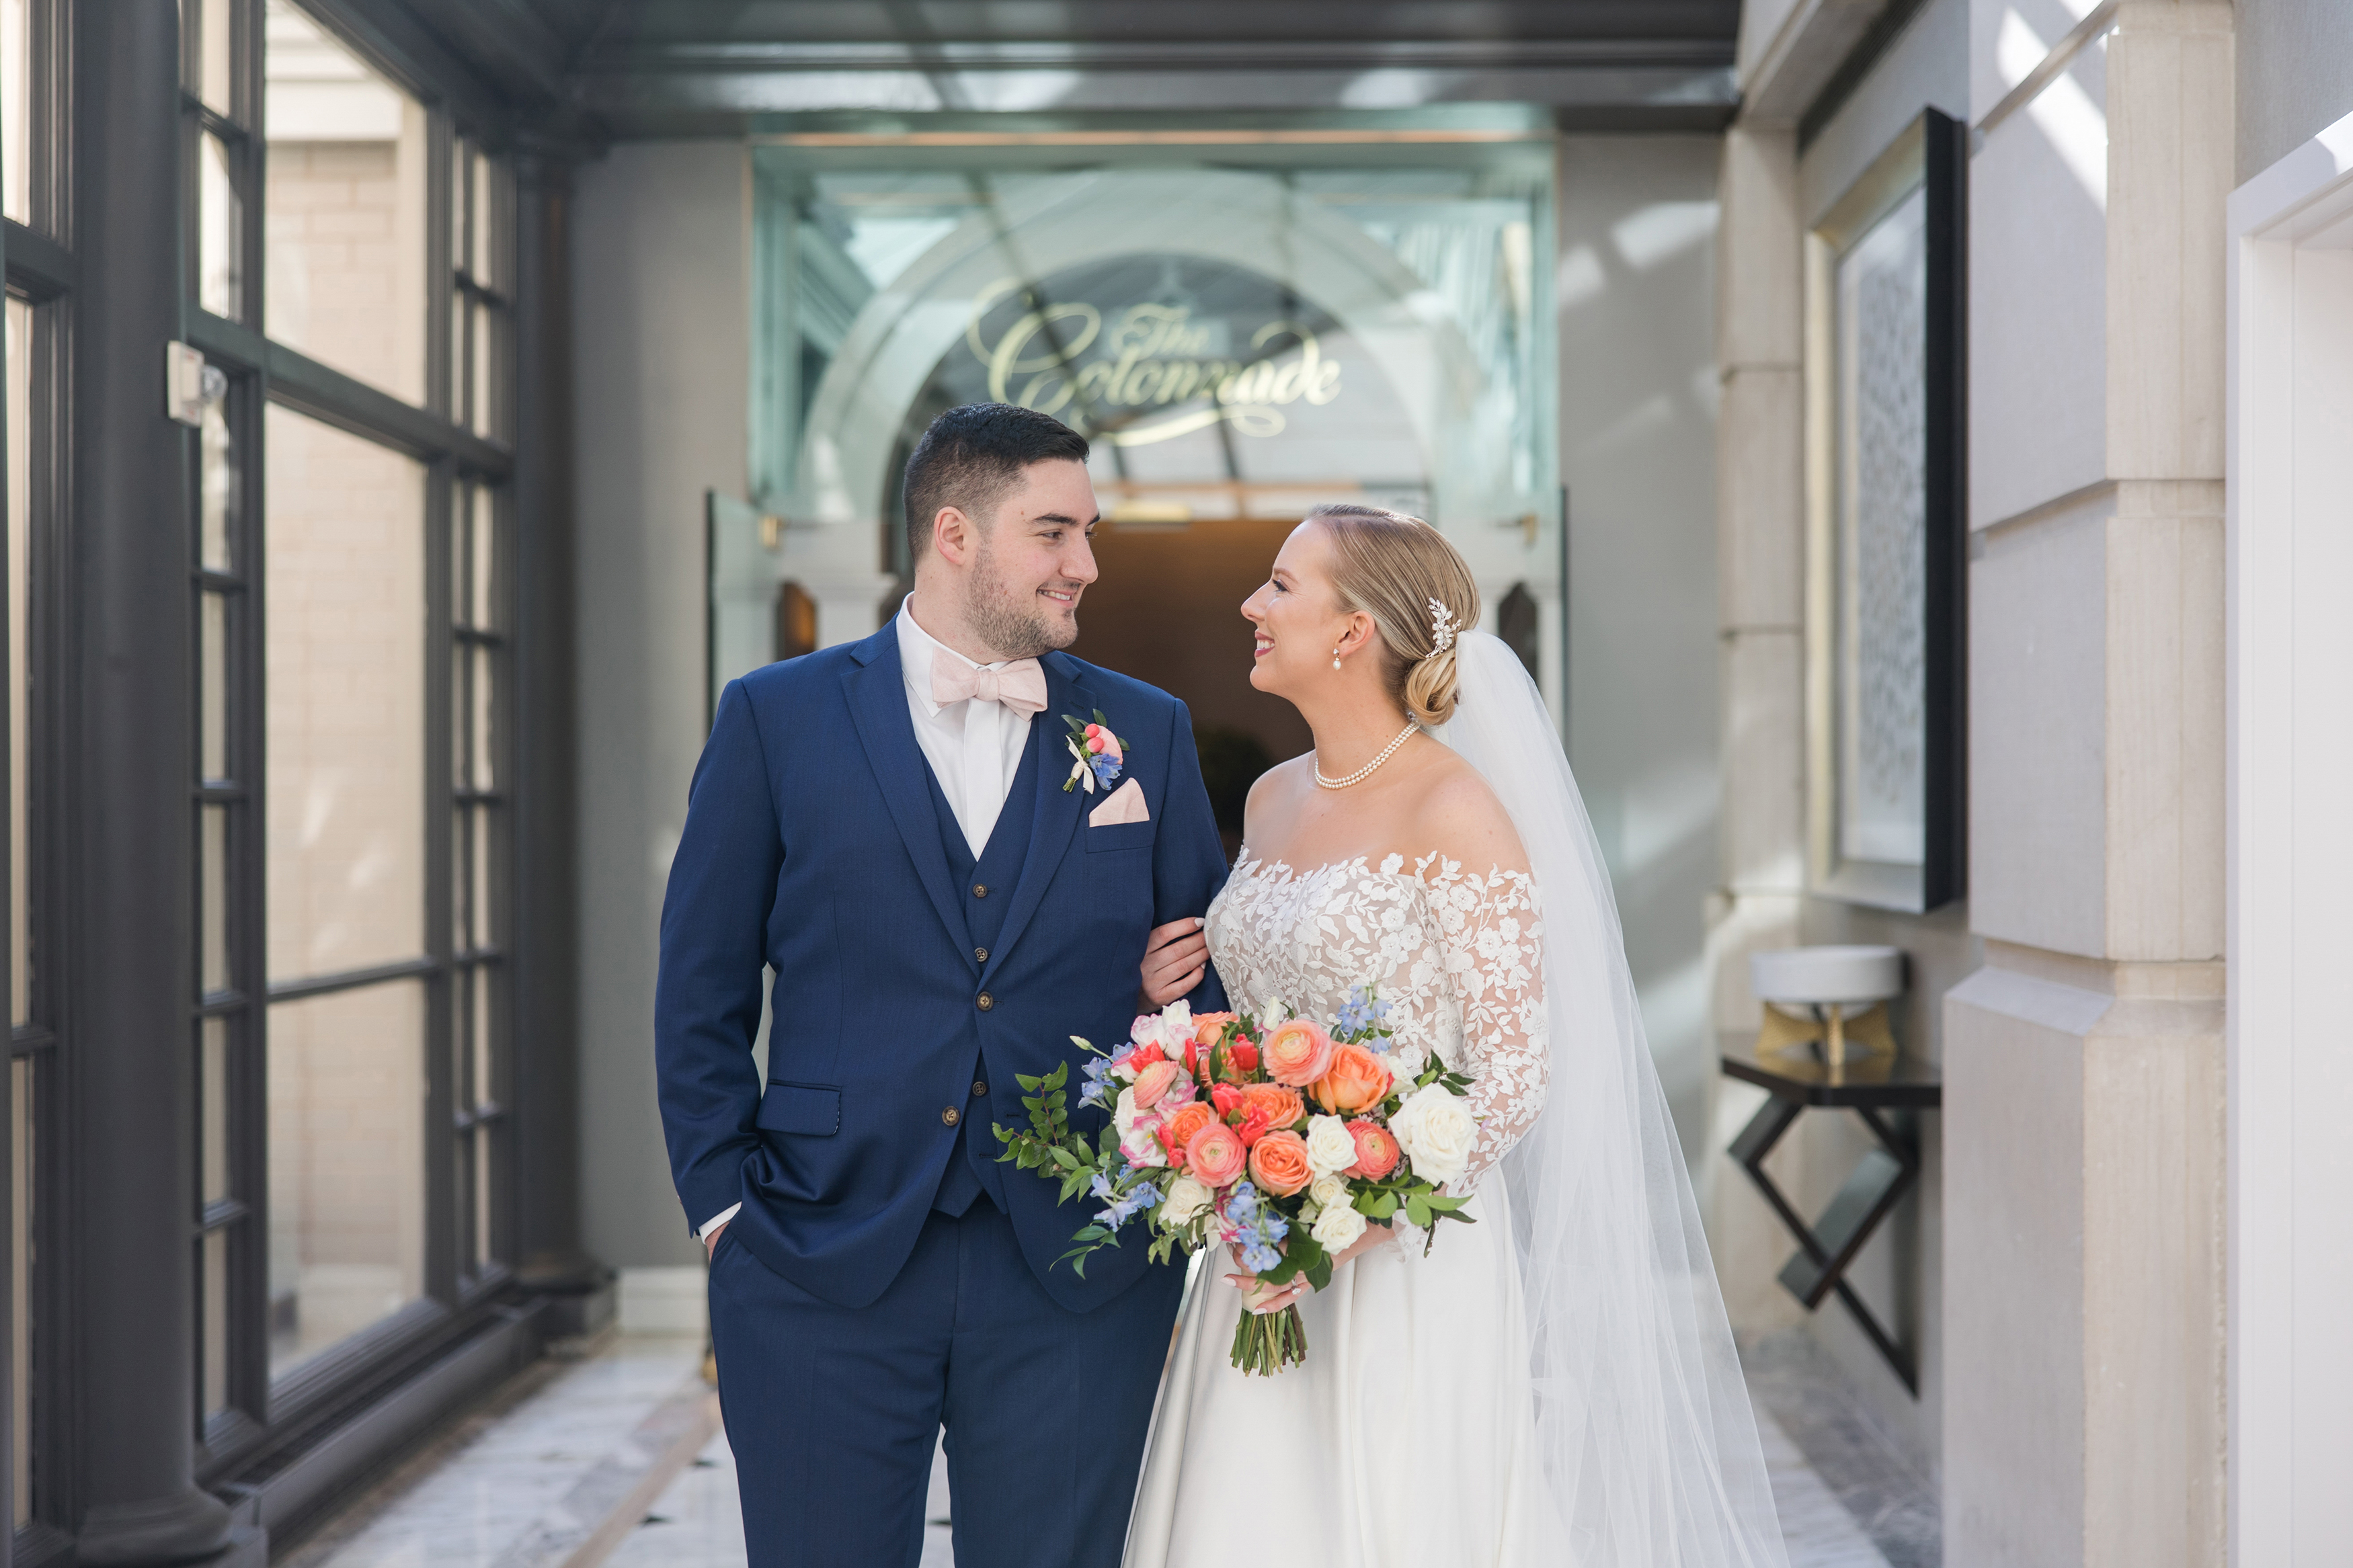 Washington, D.C. wedding in Georgetown at the Fairmont Colonade by Christa Rae Photography